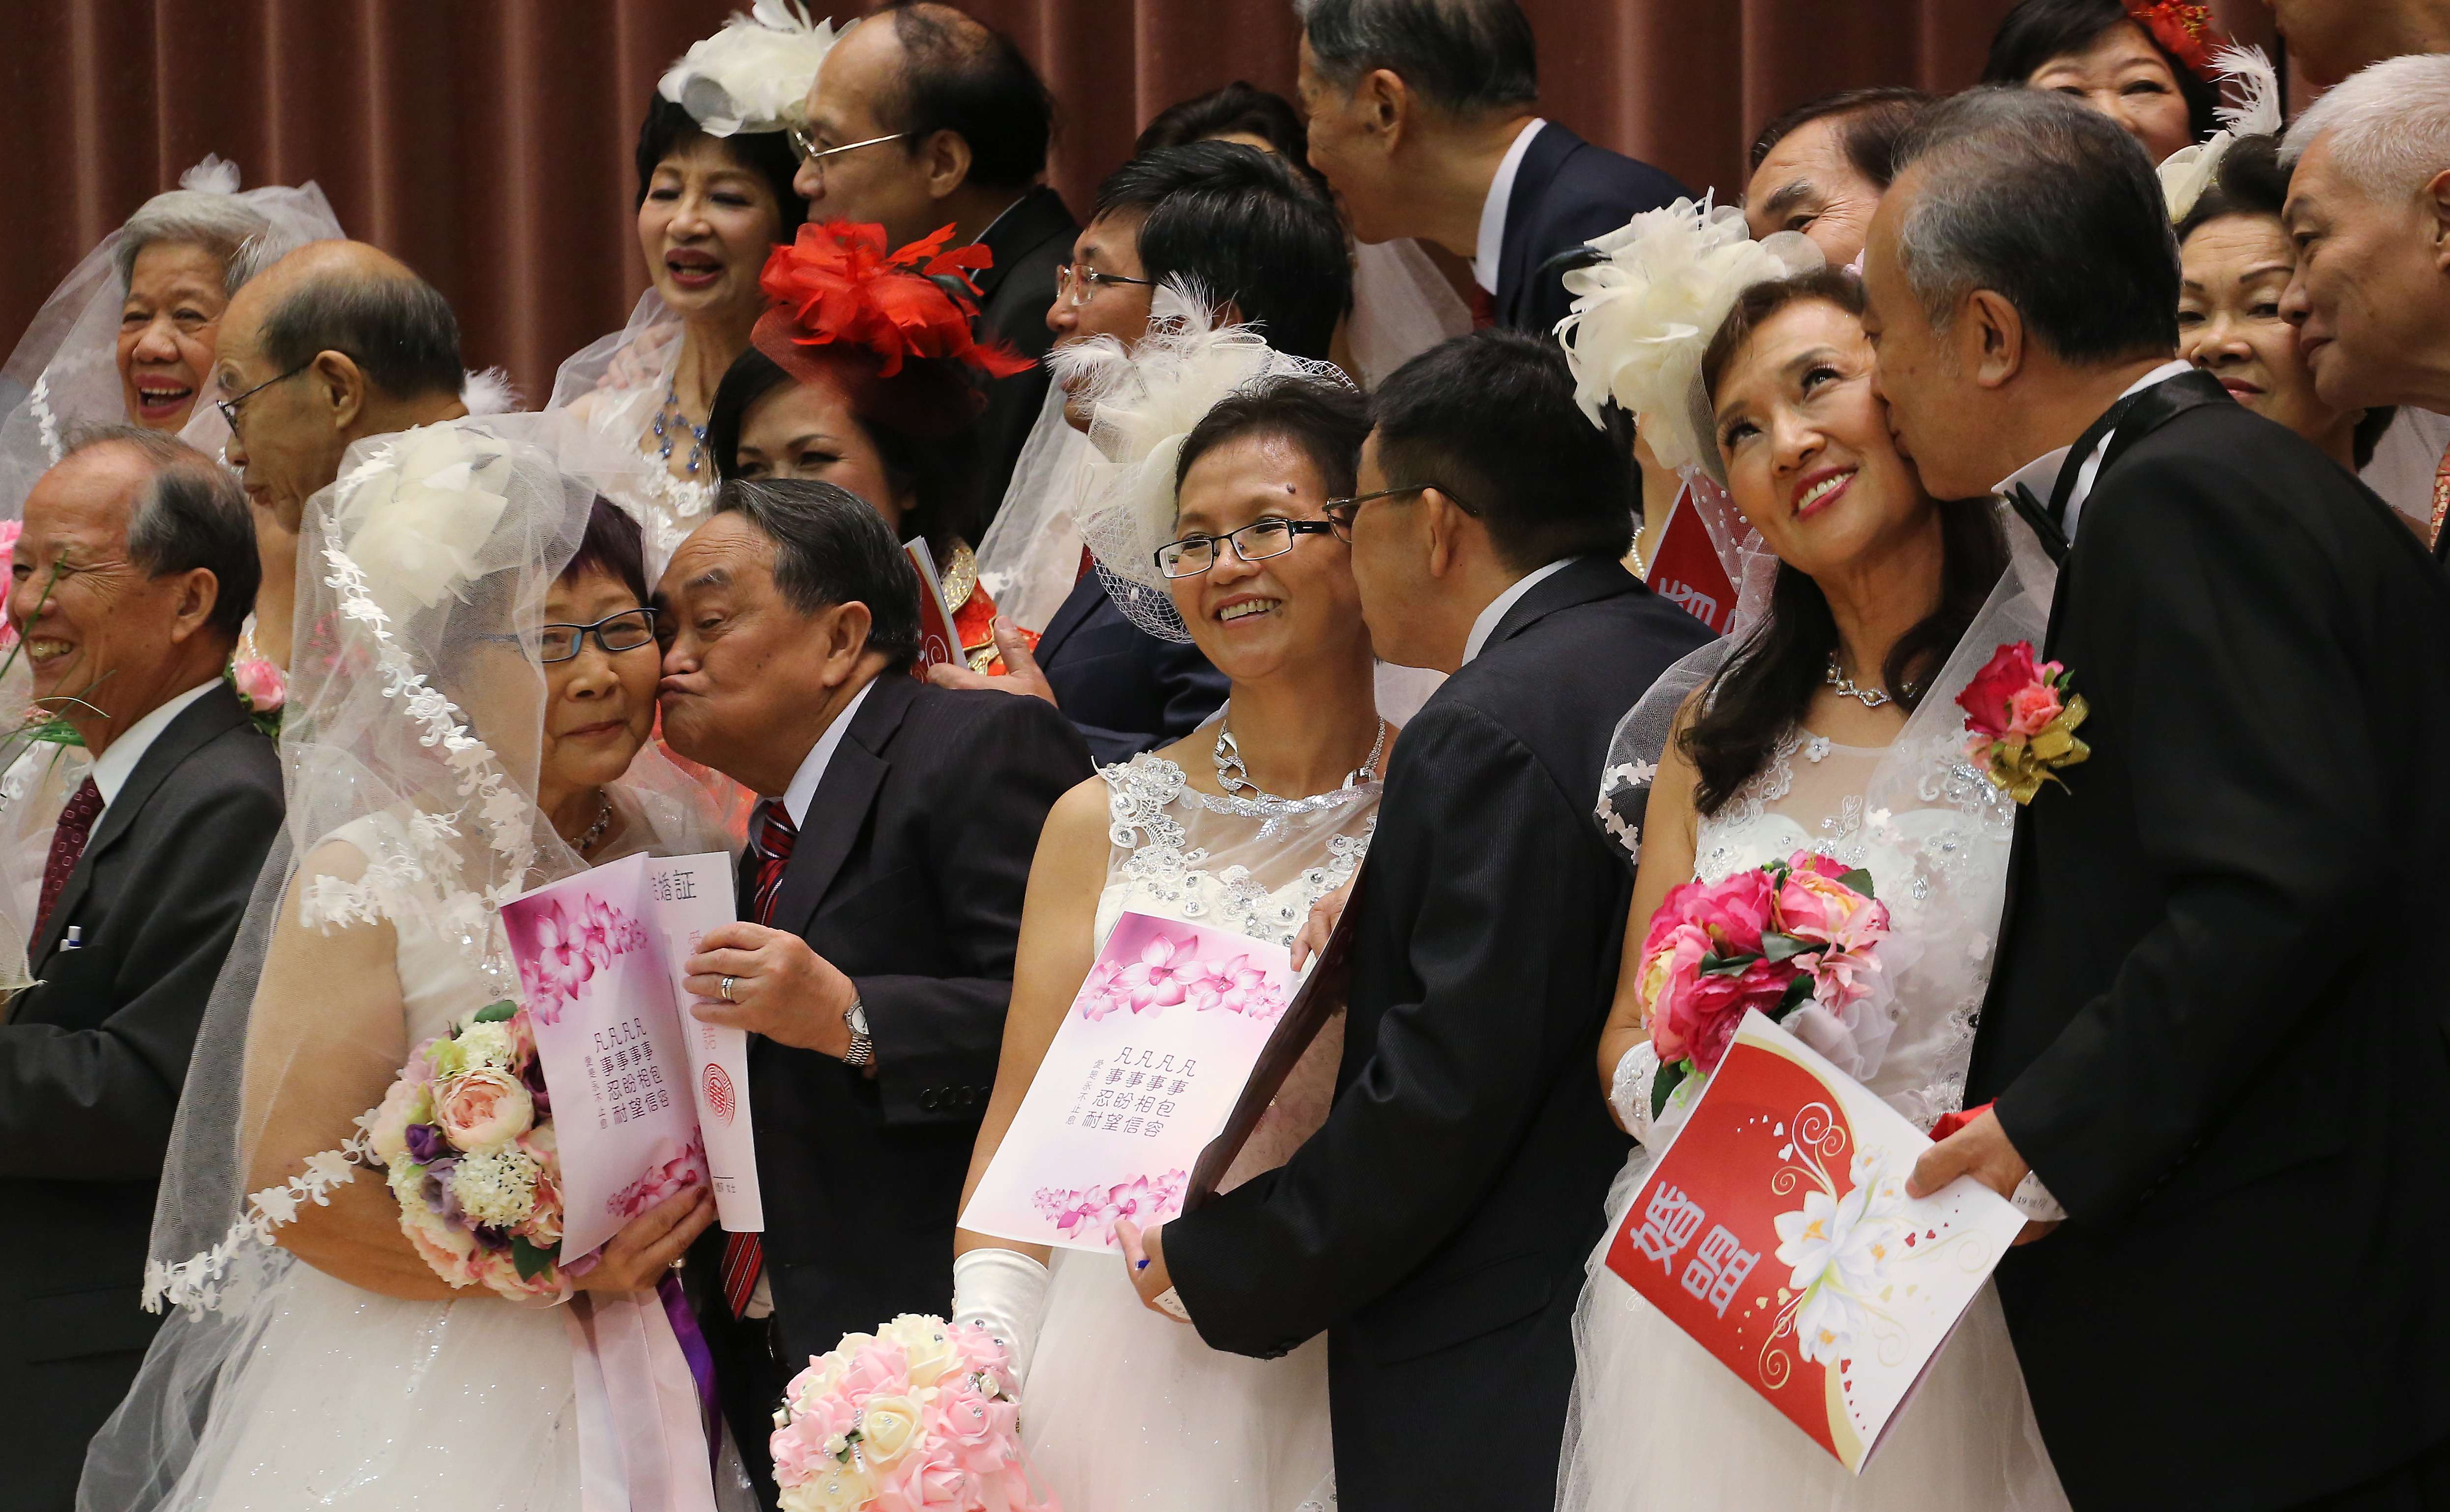 Elderly couples renew their wedding vows at the Leighton Hill Community Hall in Happy Valley on September 20 last year. Photo: Felix Wong